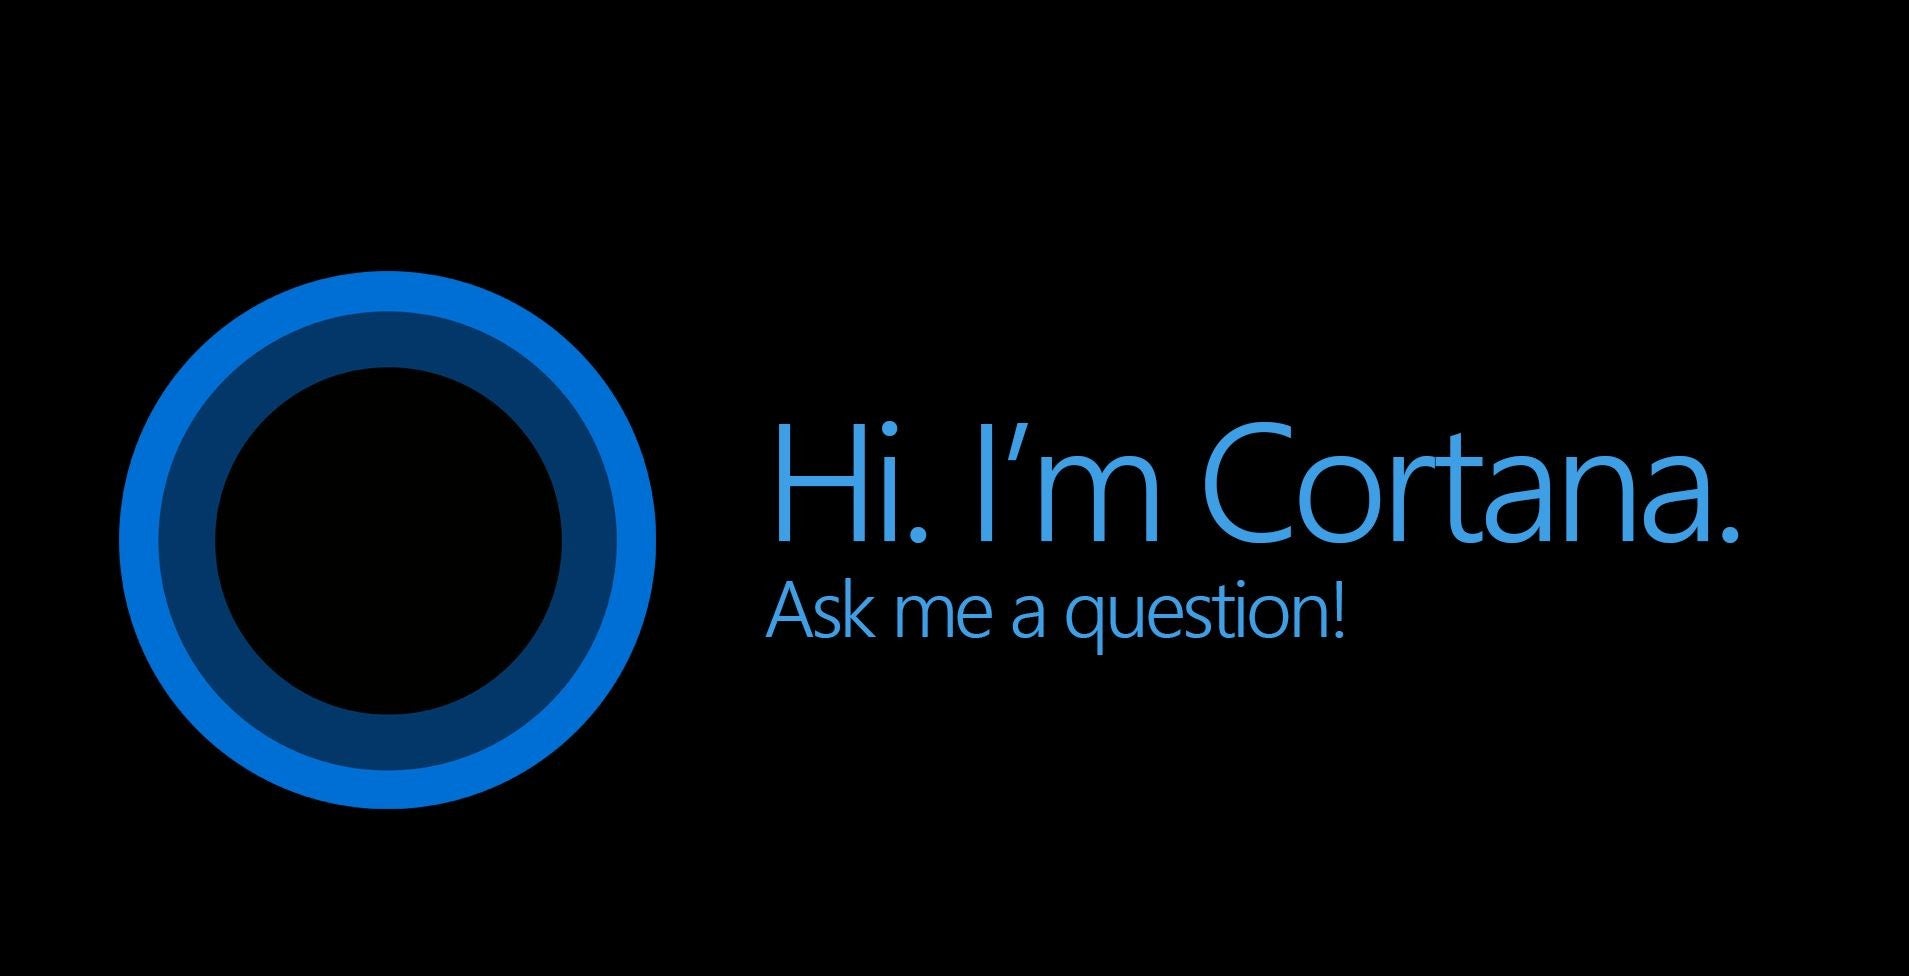 Cortana's music recognition feature not working any longer due to Groove Music closure